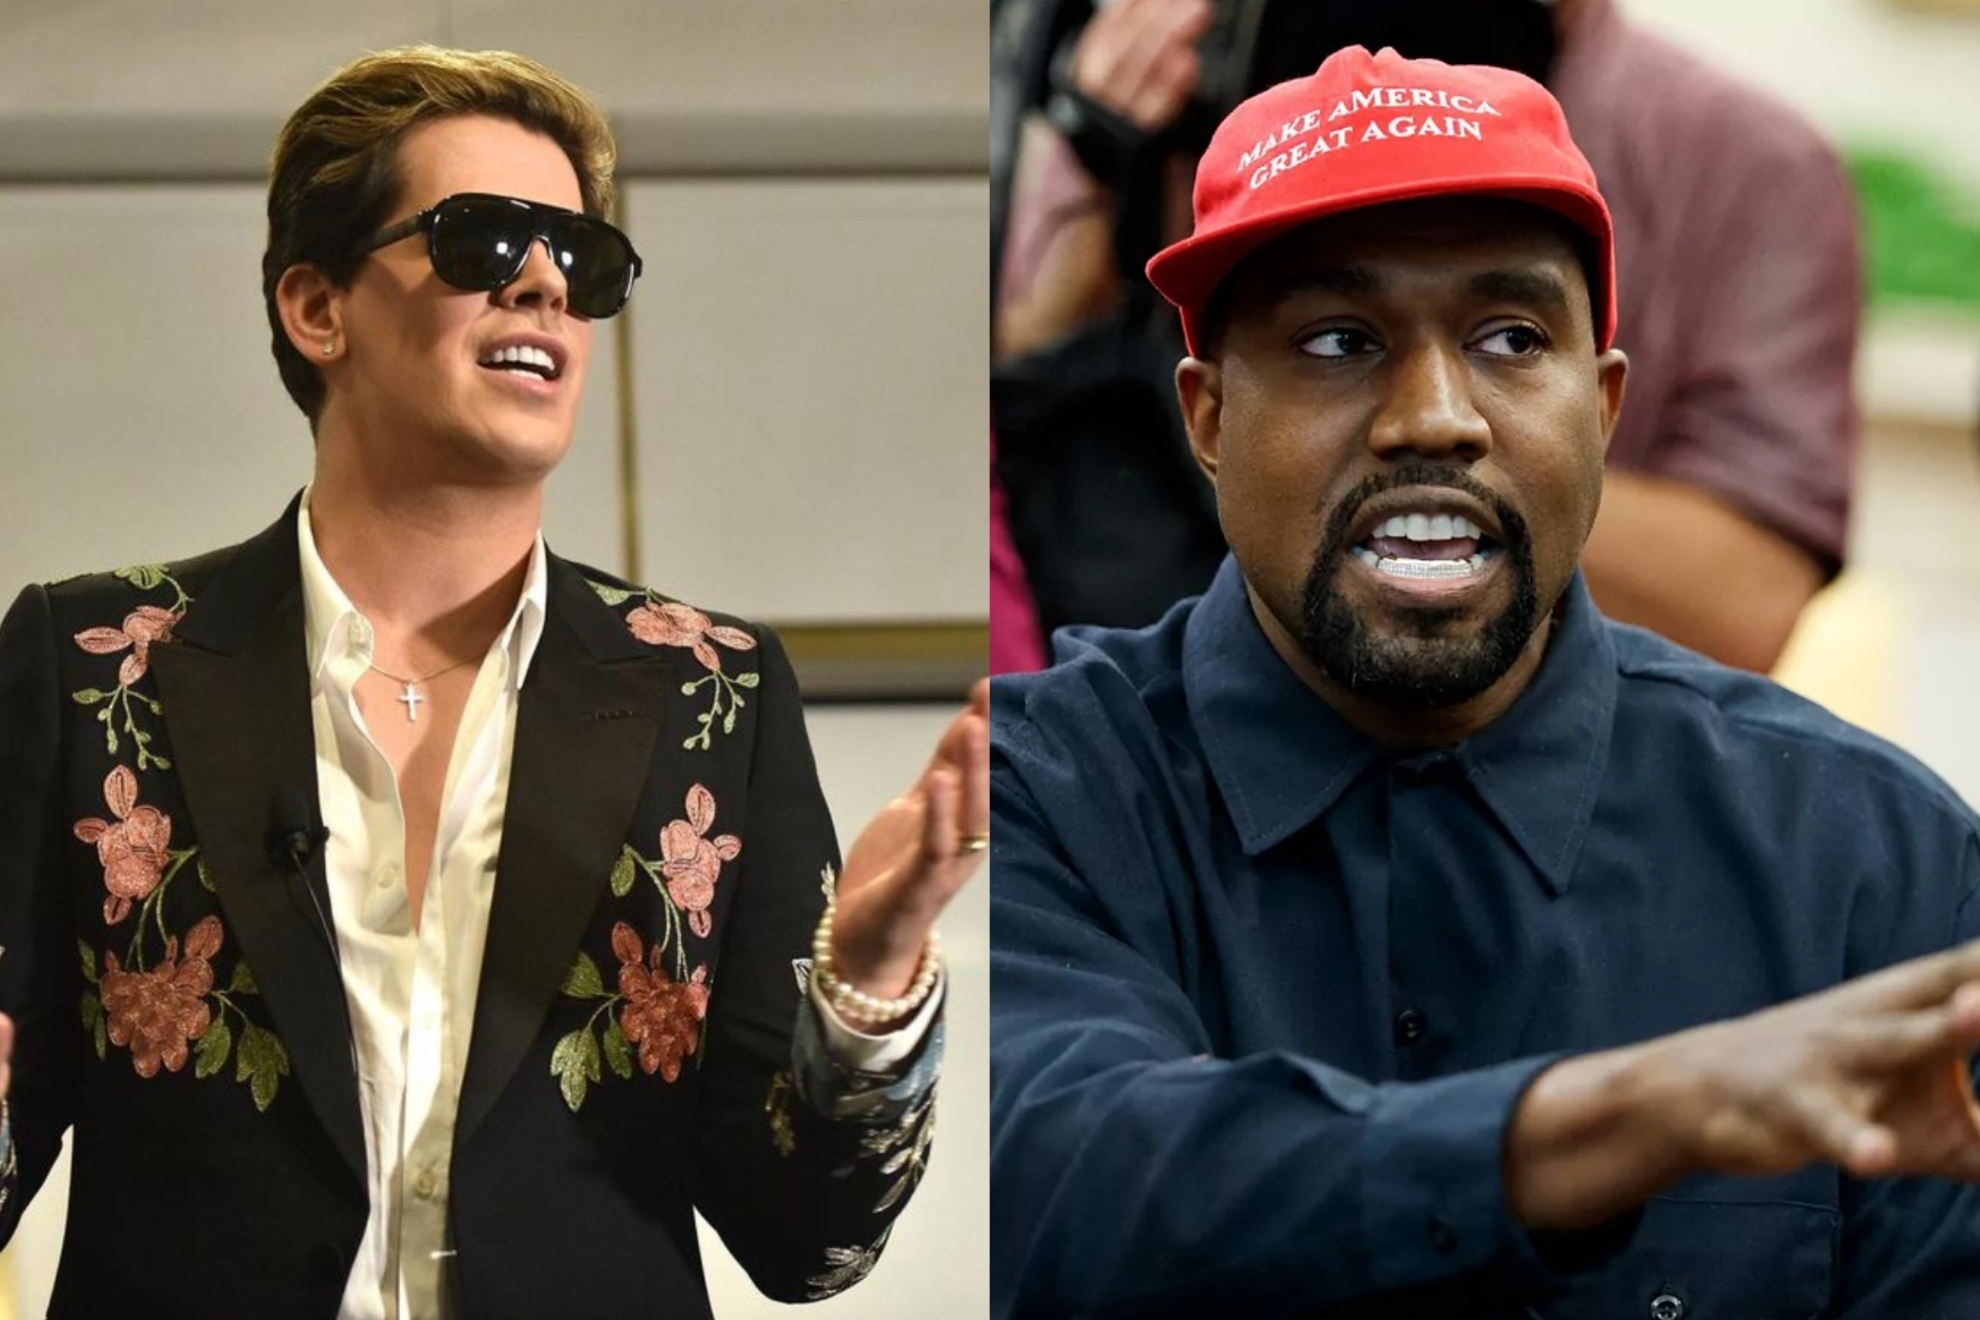 Milo Yiannopoulos and Kanye